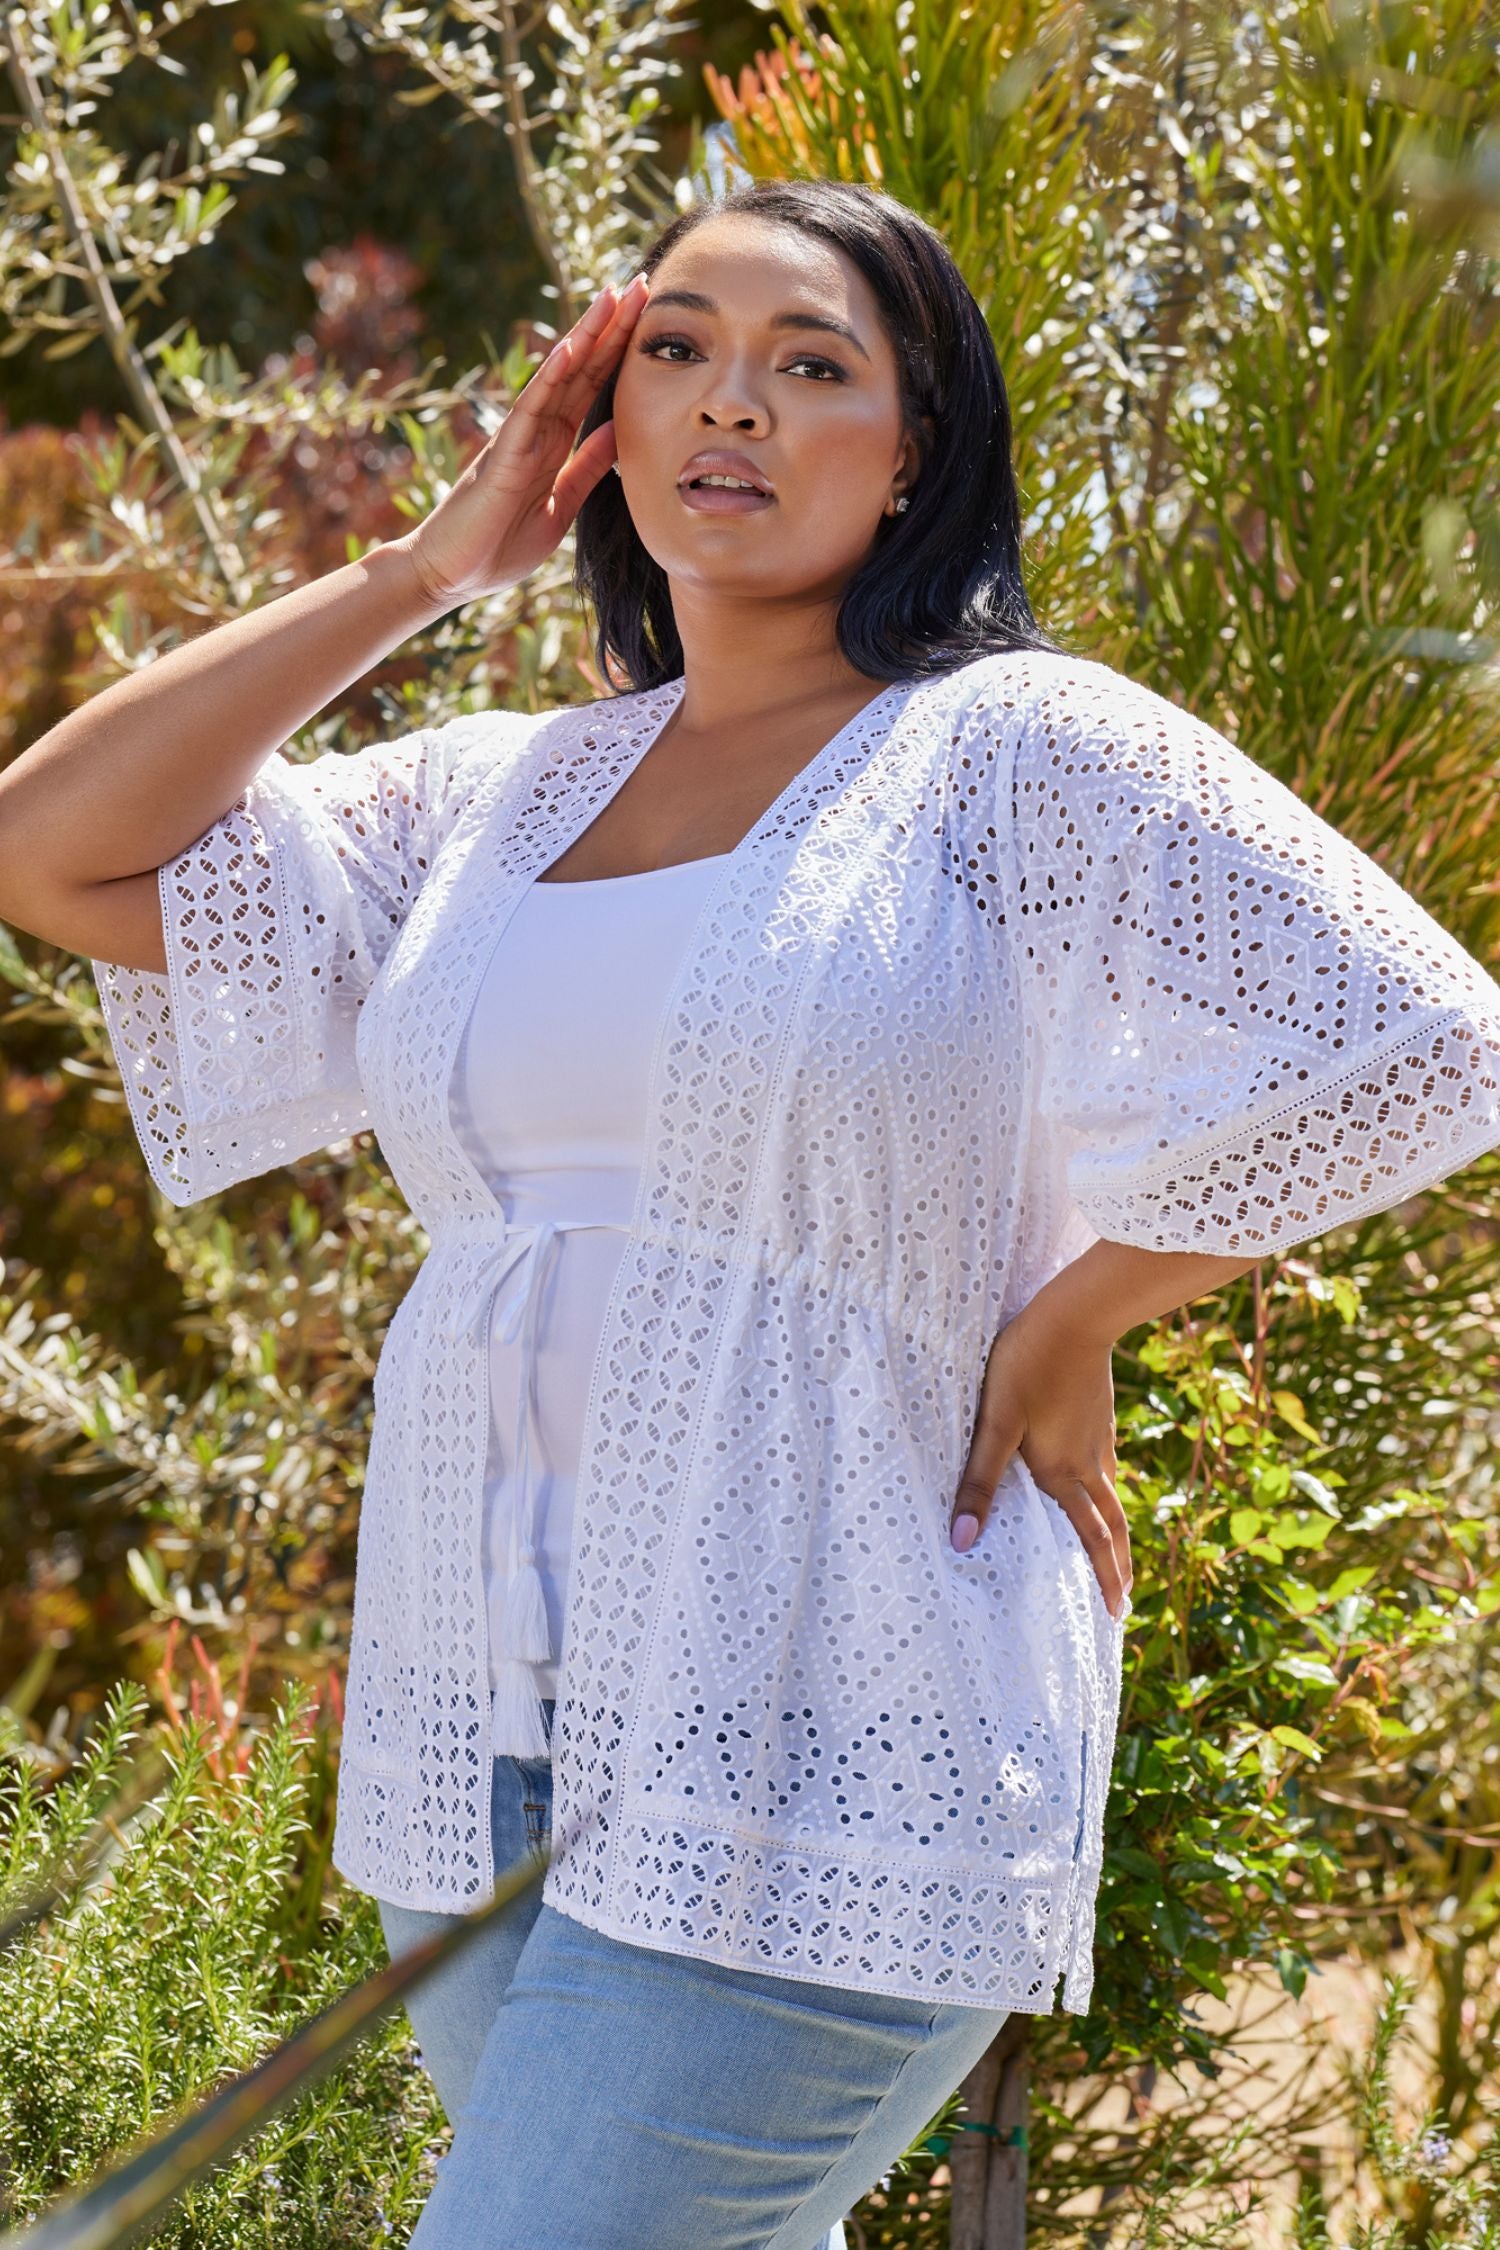 Women's Cotton Eyelet and Embroidery Kimono with Tie at Waist | Curvy